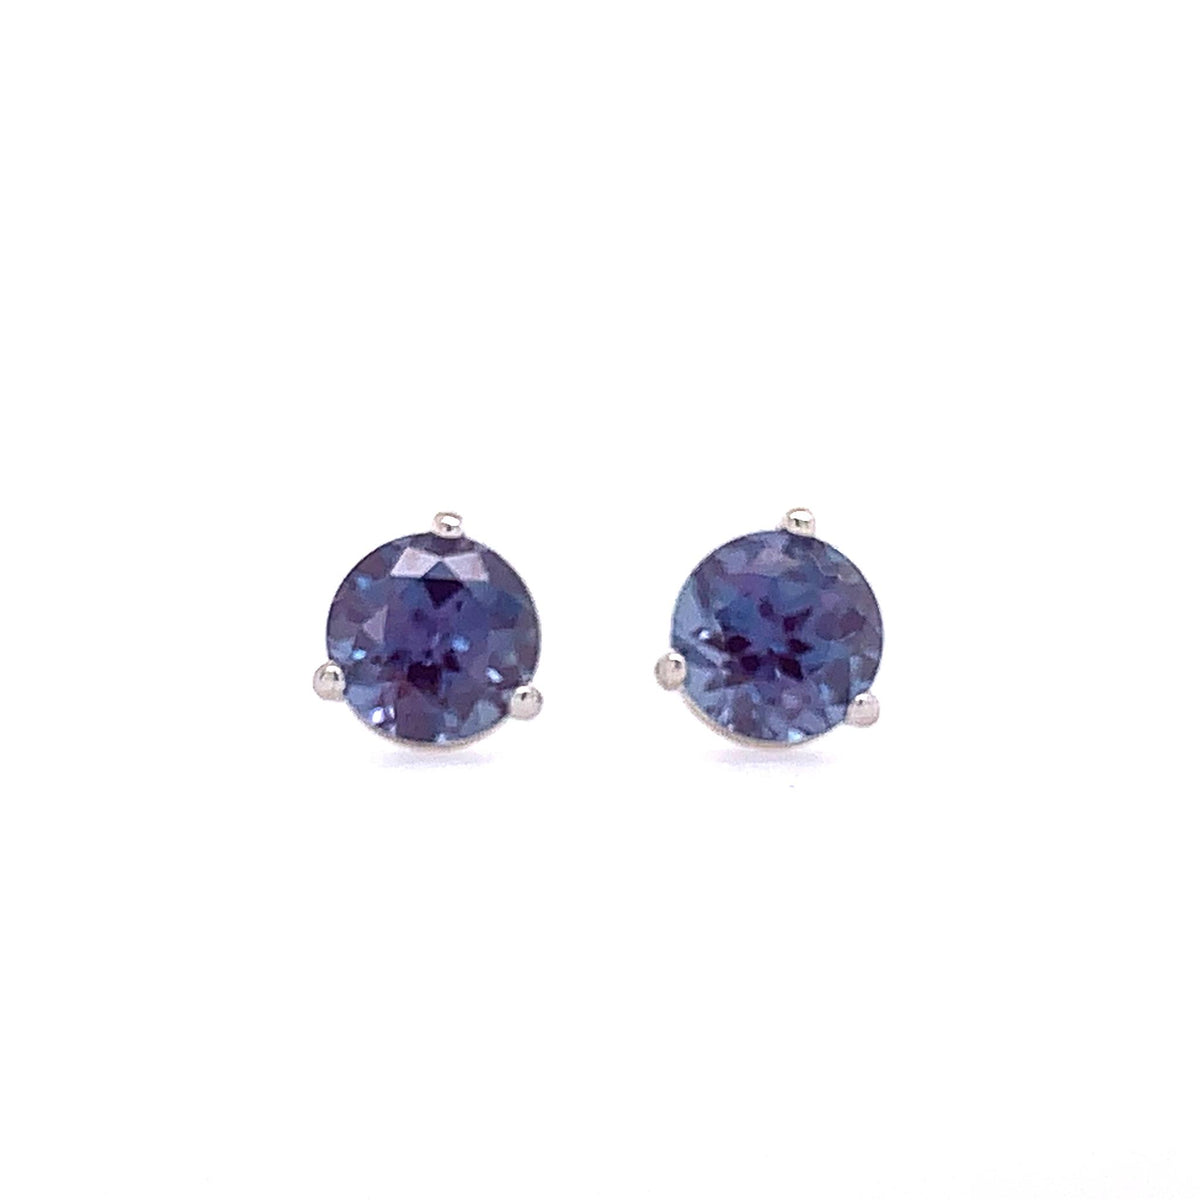 14Kt White Gold Martini Stud Earrings With 1.23ctwt Chatham Alexandrites